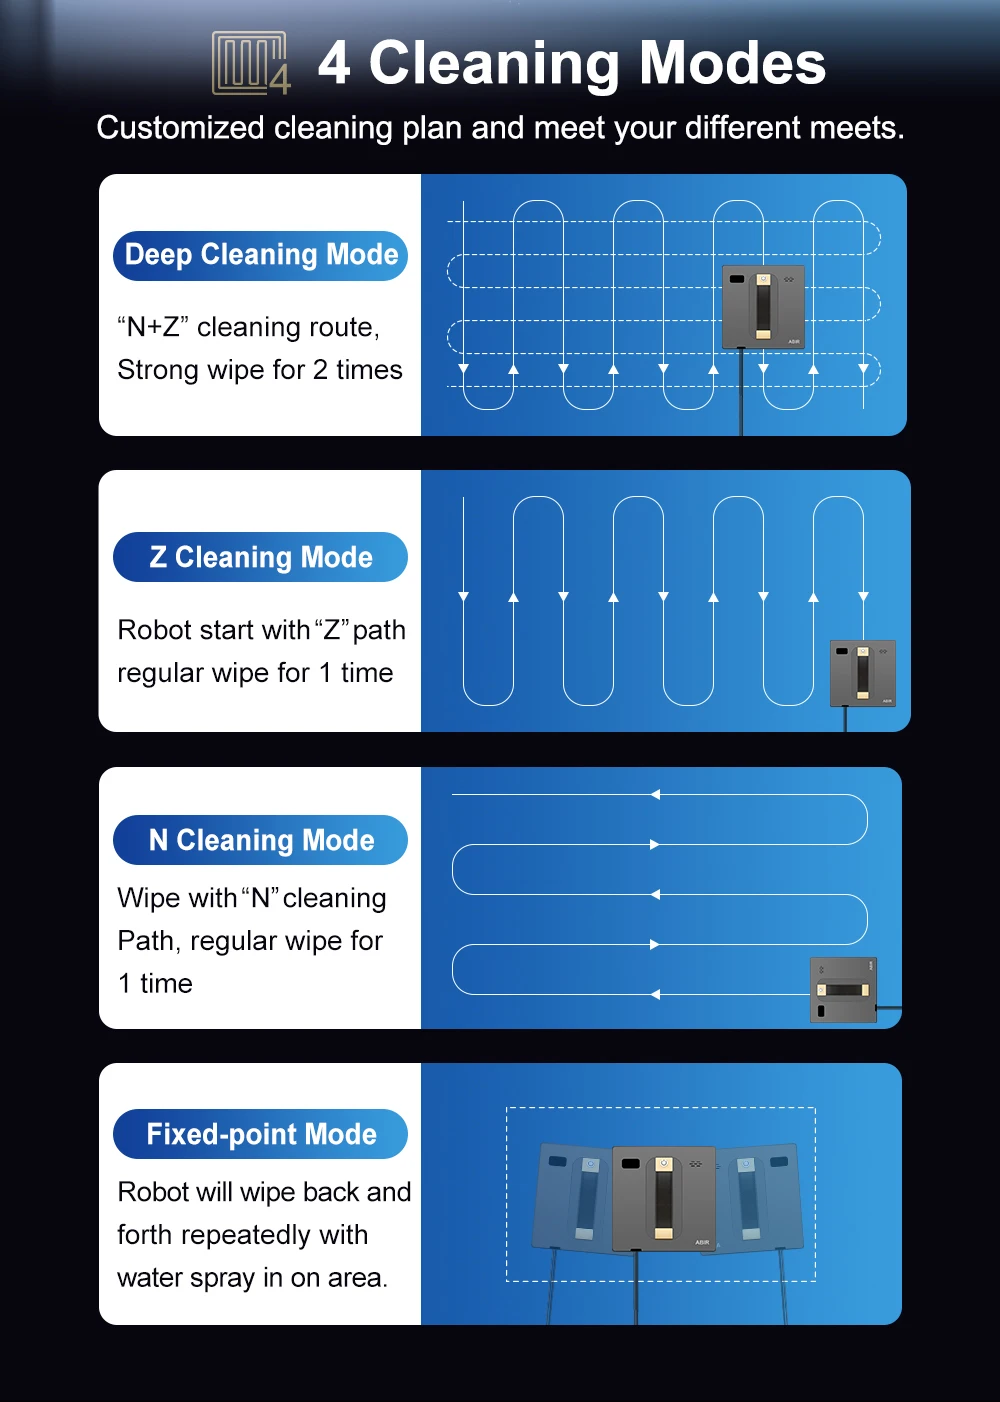 4 Cleaning Modes. Customized cleaning plan and meet your different meets: 1. Deep Cleaning Mode - "N+Z" cleaning route, Strong wipe for 2 times. 2. Z Cleaning Mode - Robot start with "Z" path regular wipe for 1 time. 3. N Cleaning Mode - Wipe with "N" cleaning Path, regular wipe for 1 time. 4. Fixed-point Mode - Robot will wipe back and forth repeatedly with water spray in on area. 